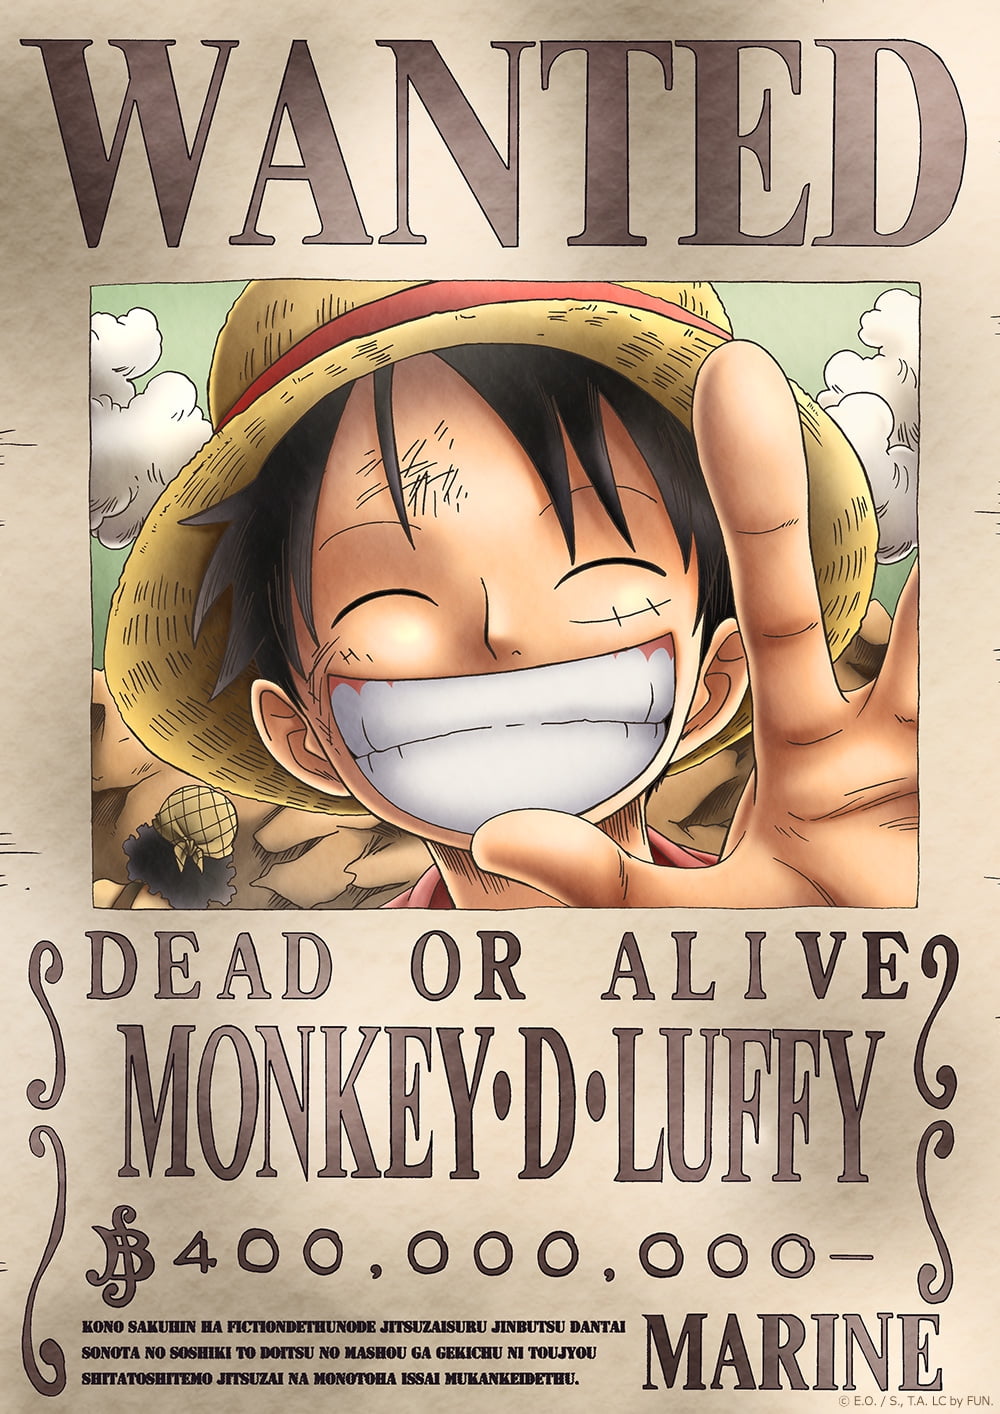 One Piece - Poster WANTED LUFFY NEW 500.000.000 - 91,5 x 61 cm